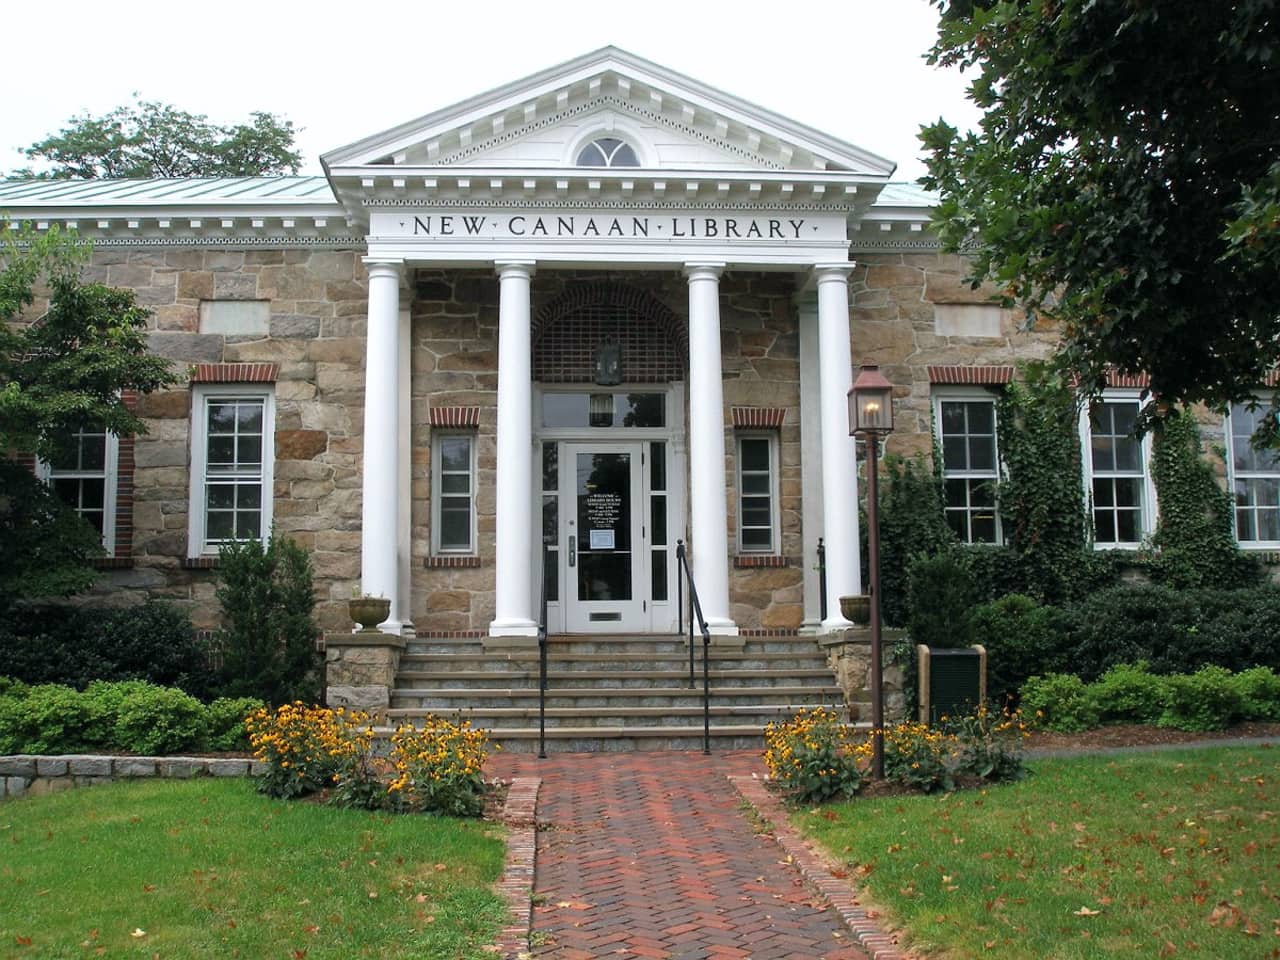 New Canaan Library will host a building event for children.